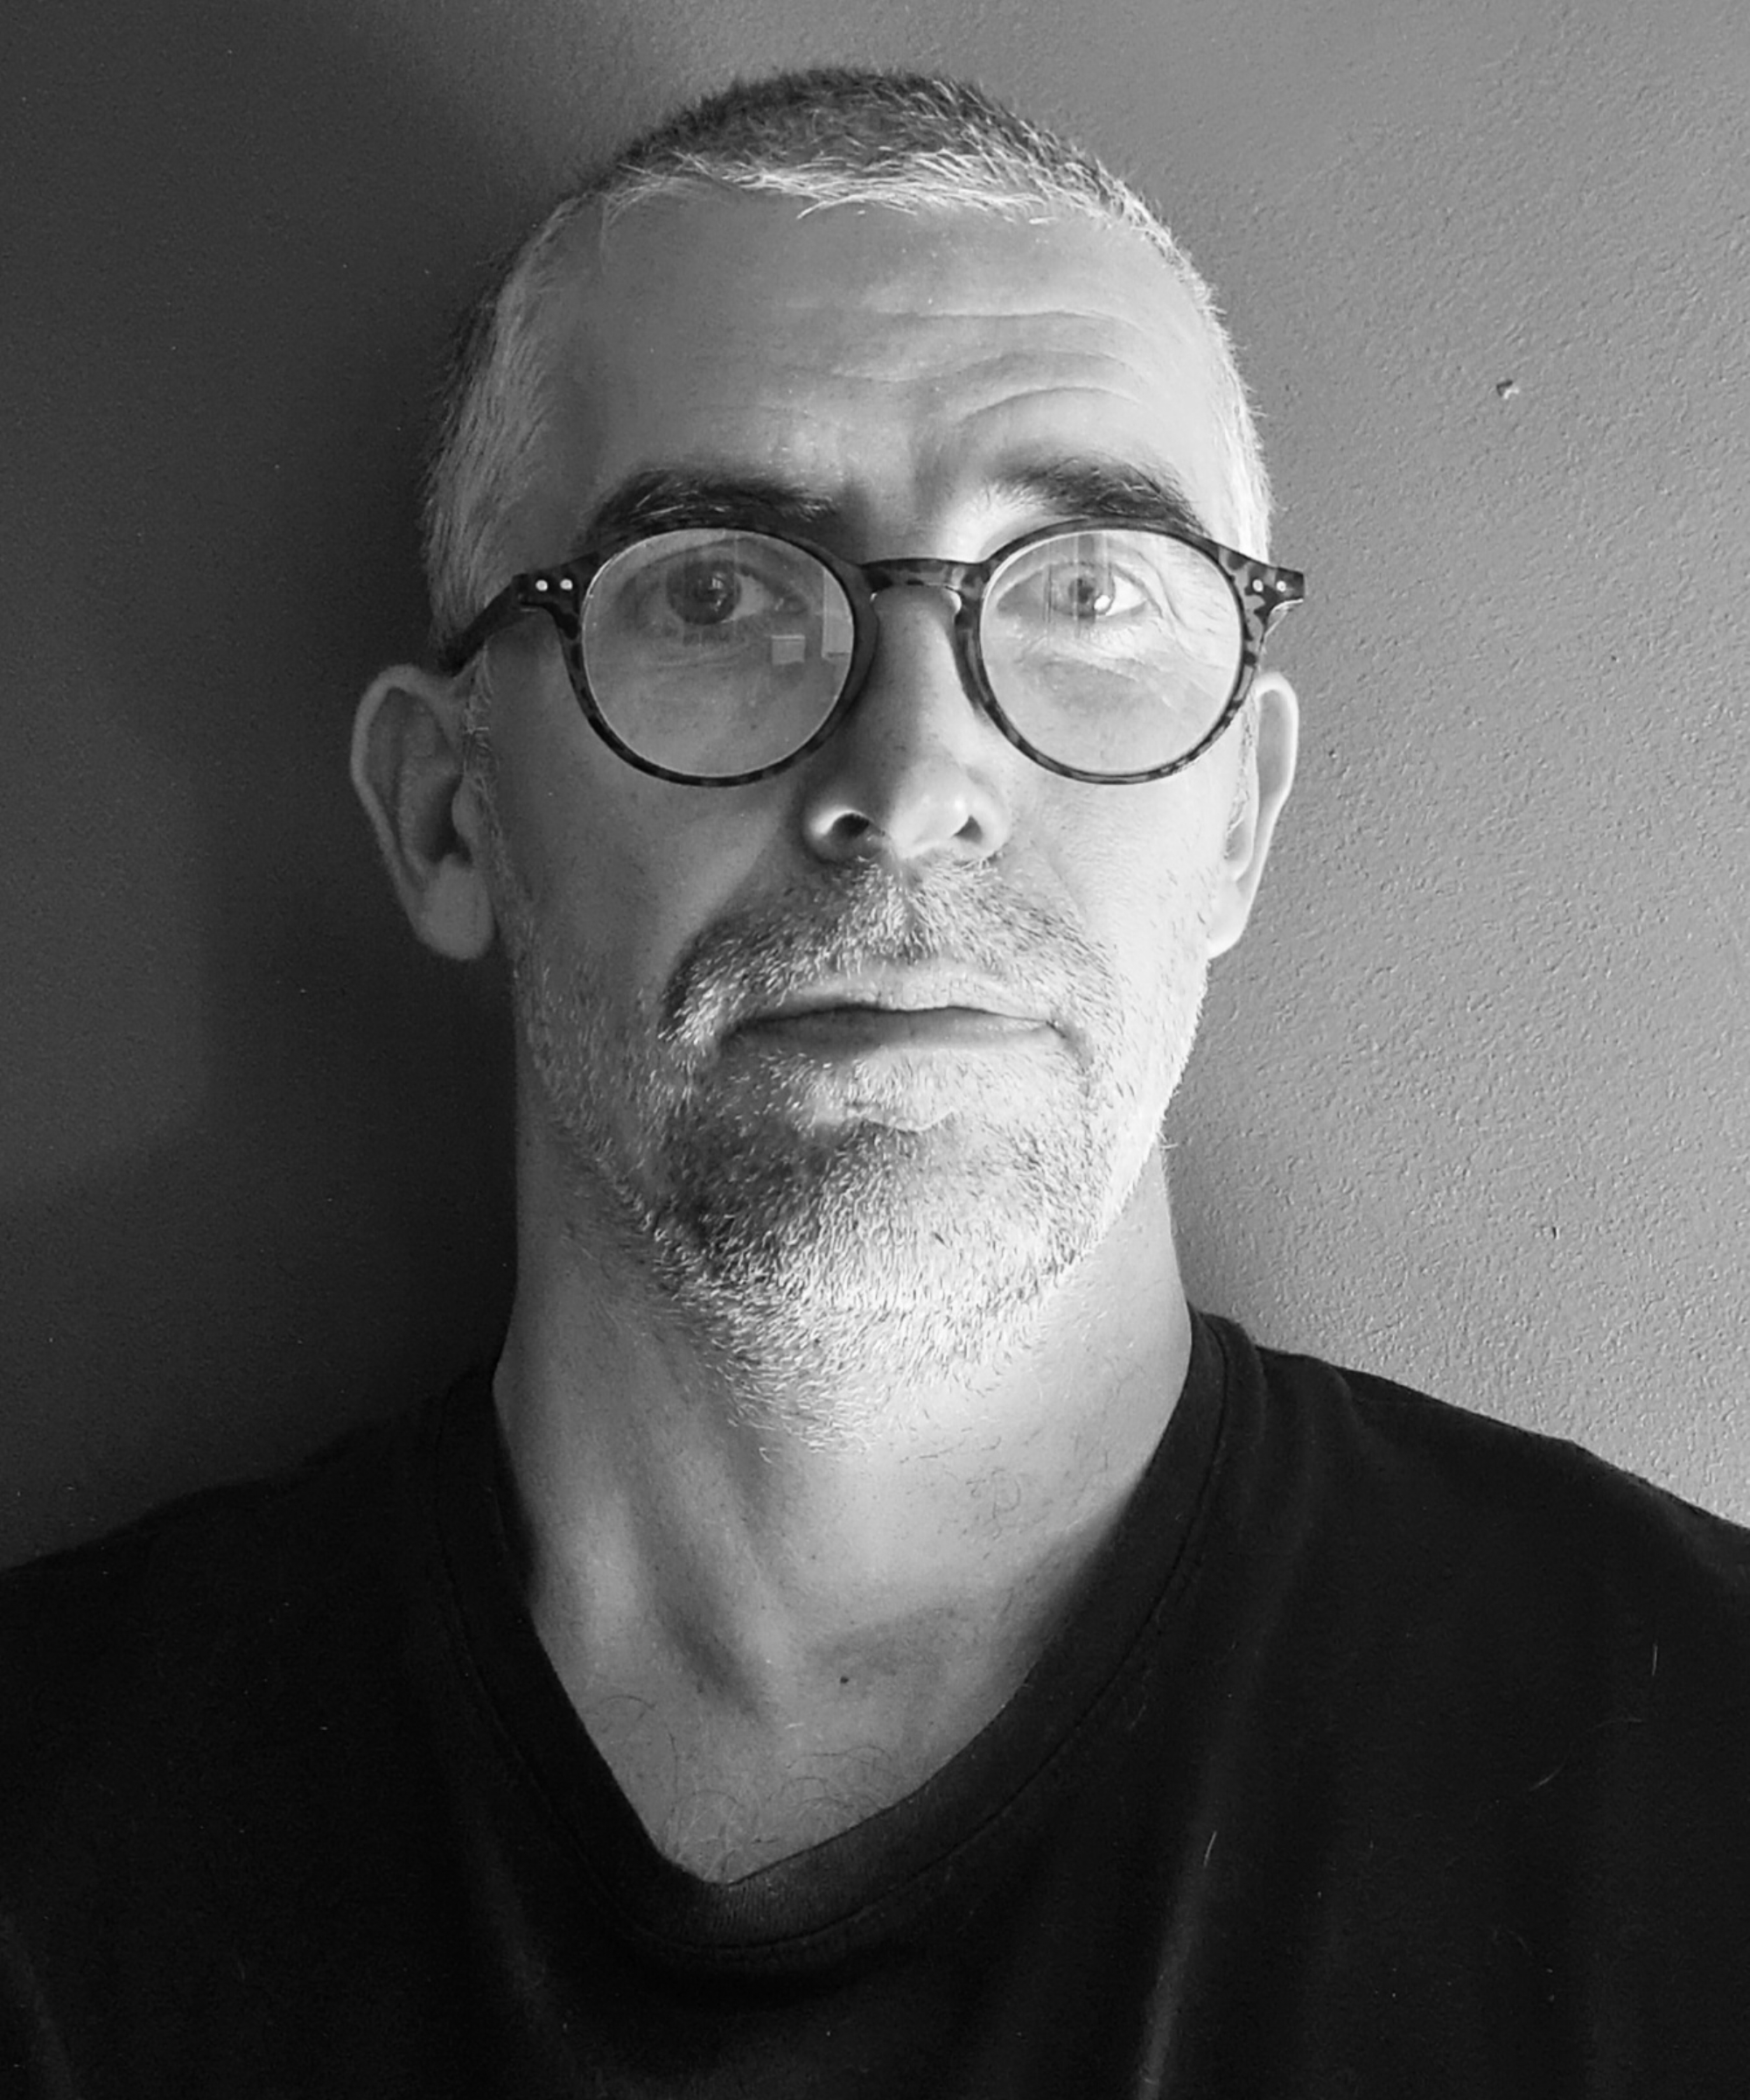 black and white headshot of man with short hair, beard and glasses